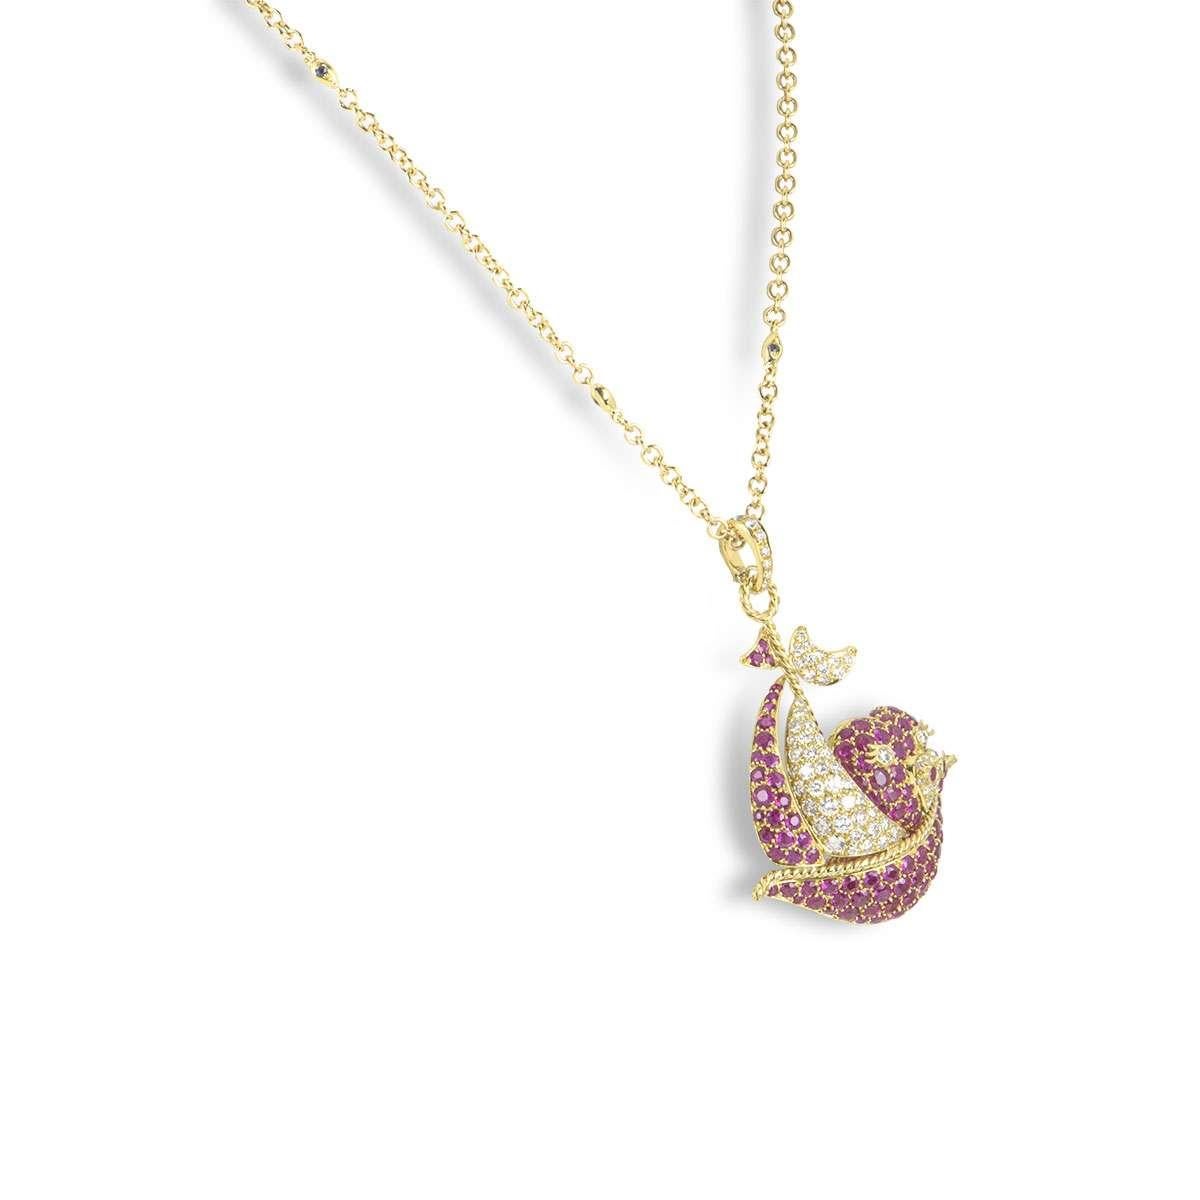 An 18k yellow gold ruby and diamond pendant. The pendant features a large sailing boat motif, set with round brilliant cut diamonds and rubies. The diamonds have a total weight of approximately 1.63ct and the rubies total approximately 4.69ct. The